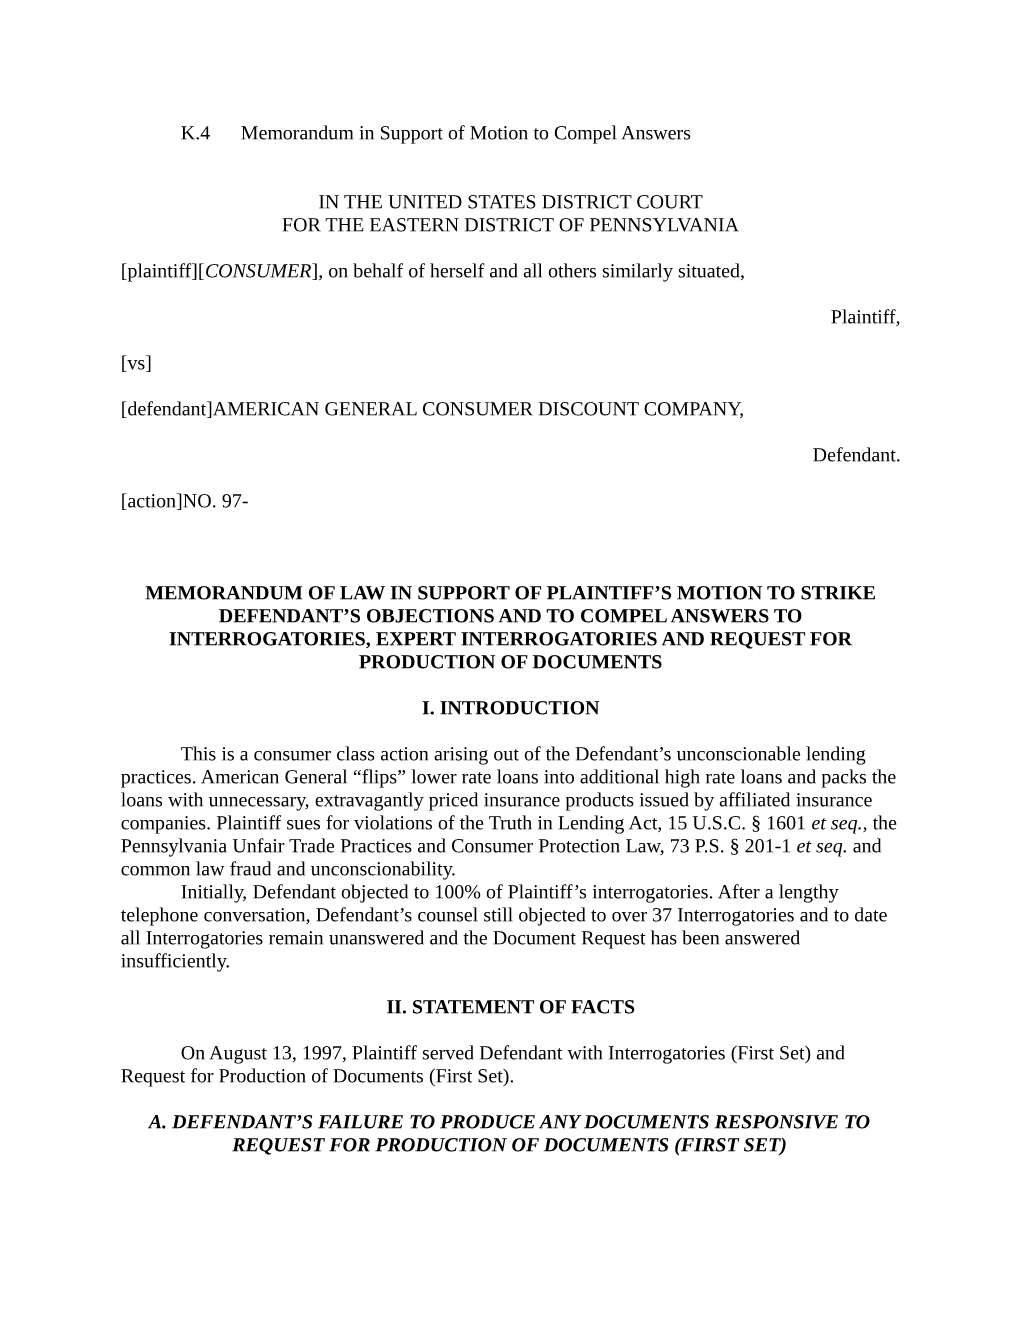 K.4 Memorandum in Support of Motion to Compel Answers in the UNITED STATES DISTRICT COURT for the EASTERN DISTRICT of PENNSYLVAN